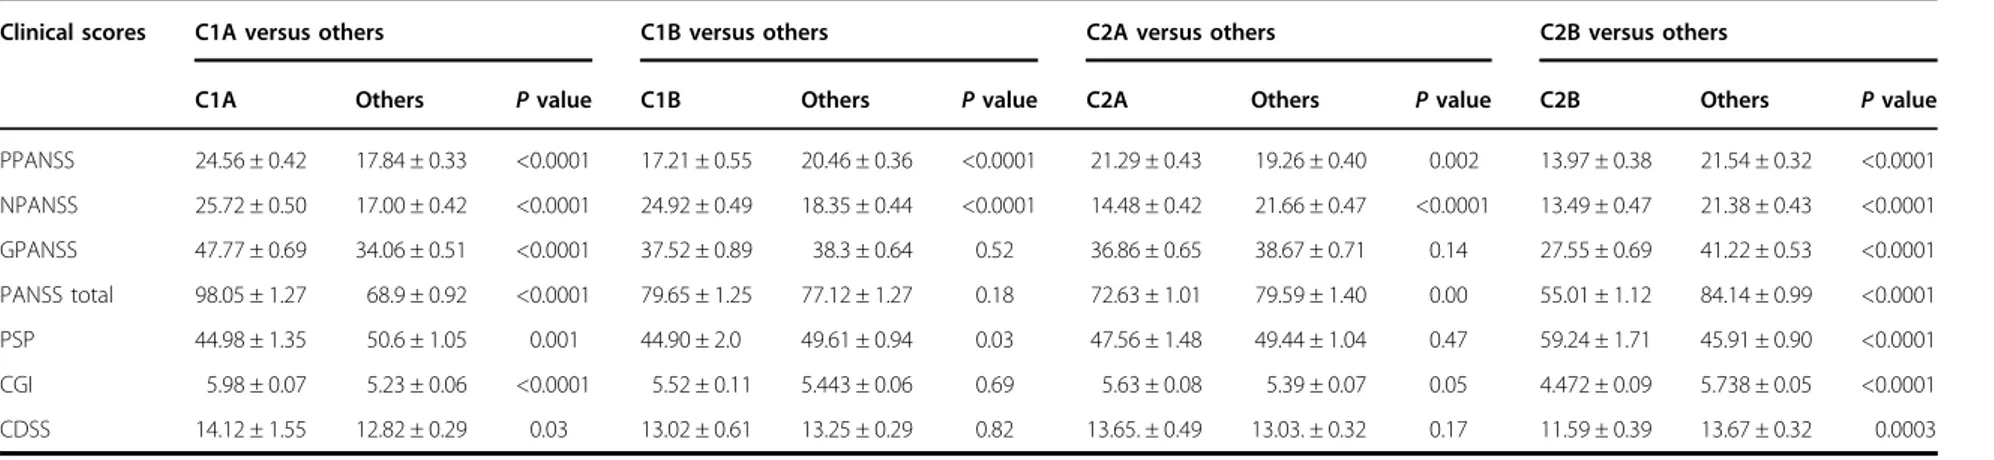 Table 2 Clinical score comparisons between individual patient subtypes